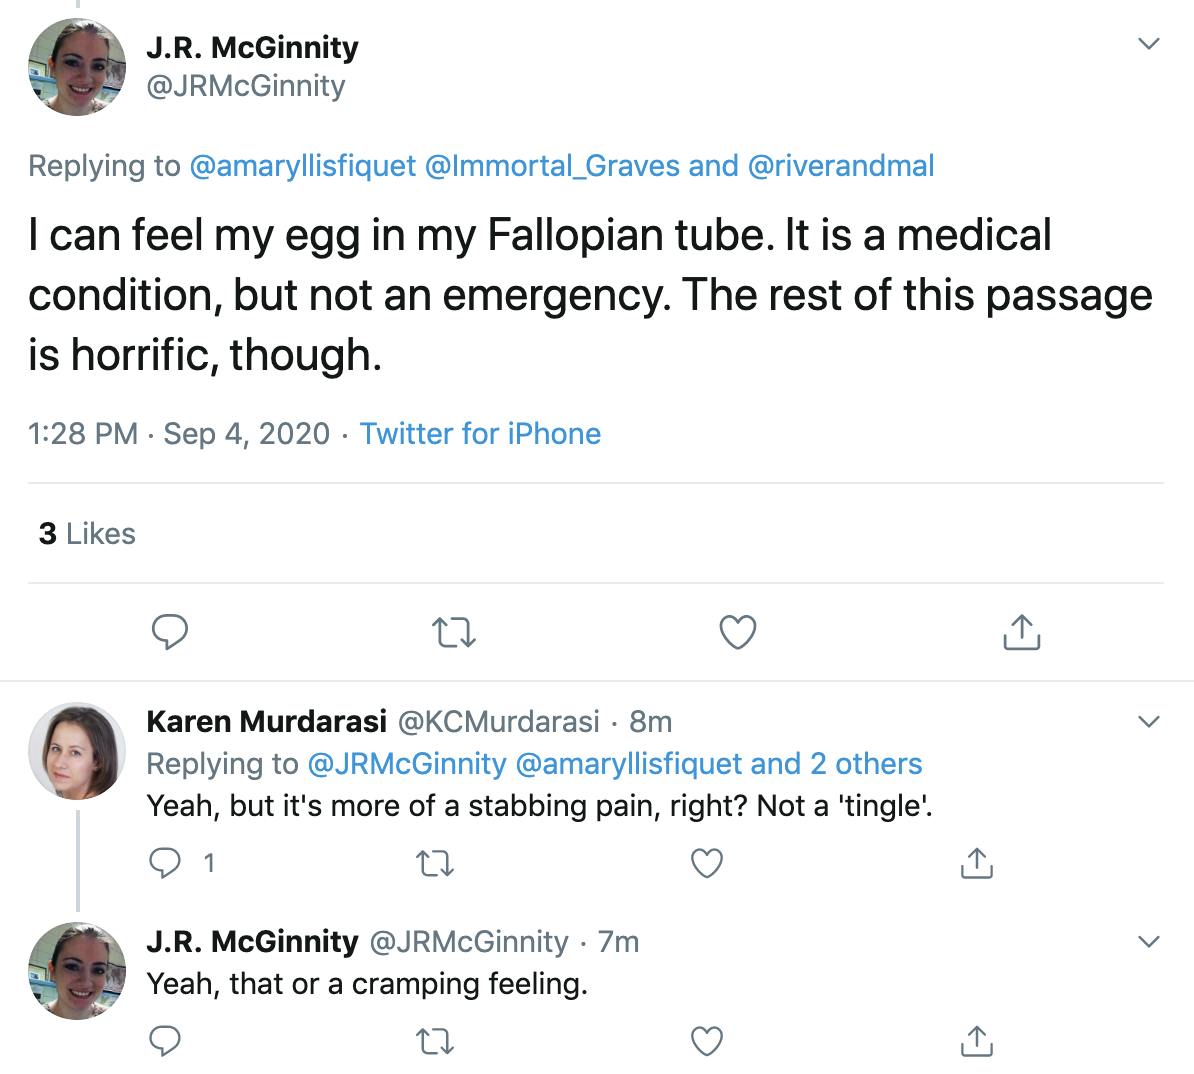 @JRMcGinnity "I can feel my egg in my Fallopian tube. It is a medical condition, but not an emergency. The rest of this passage is horrific, though."  @KCMurdarasi "Yeah, but it's more of a stabbing pain, right? Not a 'tingle'."  @JRMcGinnity  "Yeah, that or a cramping feeling."